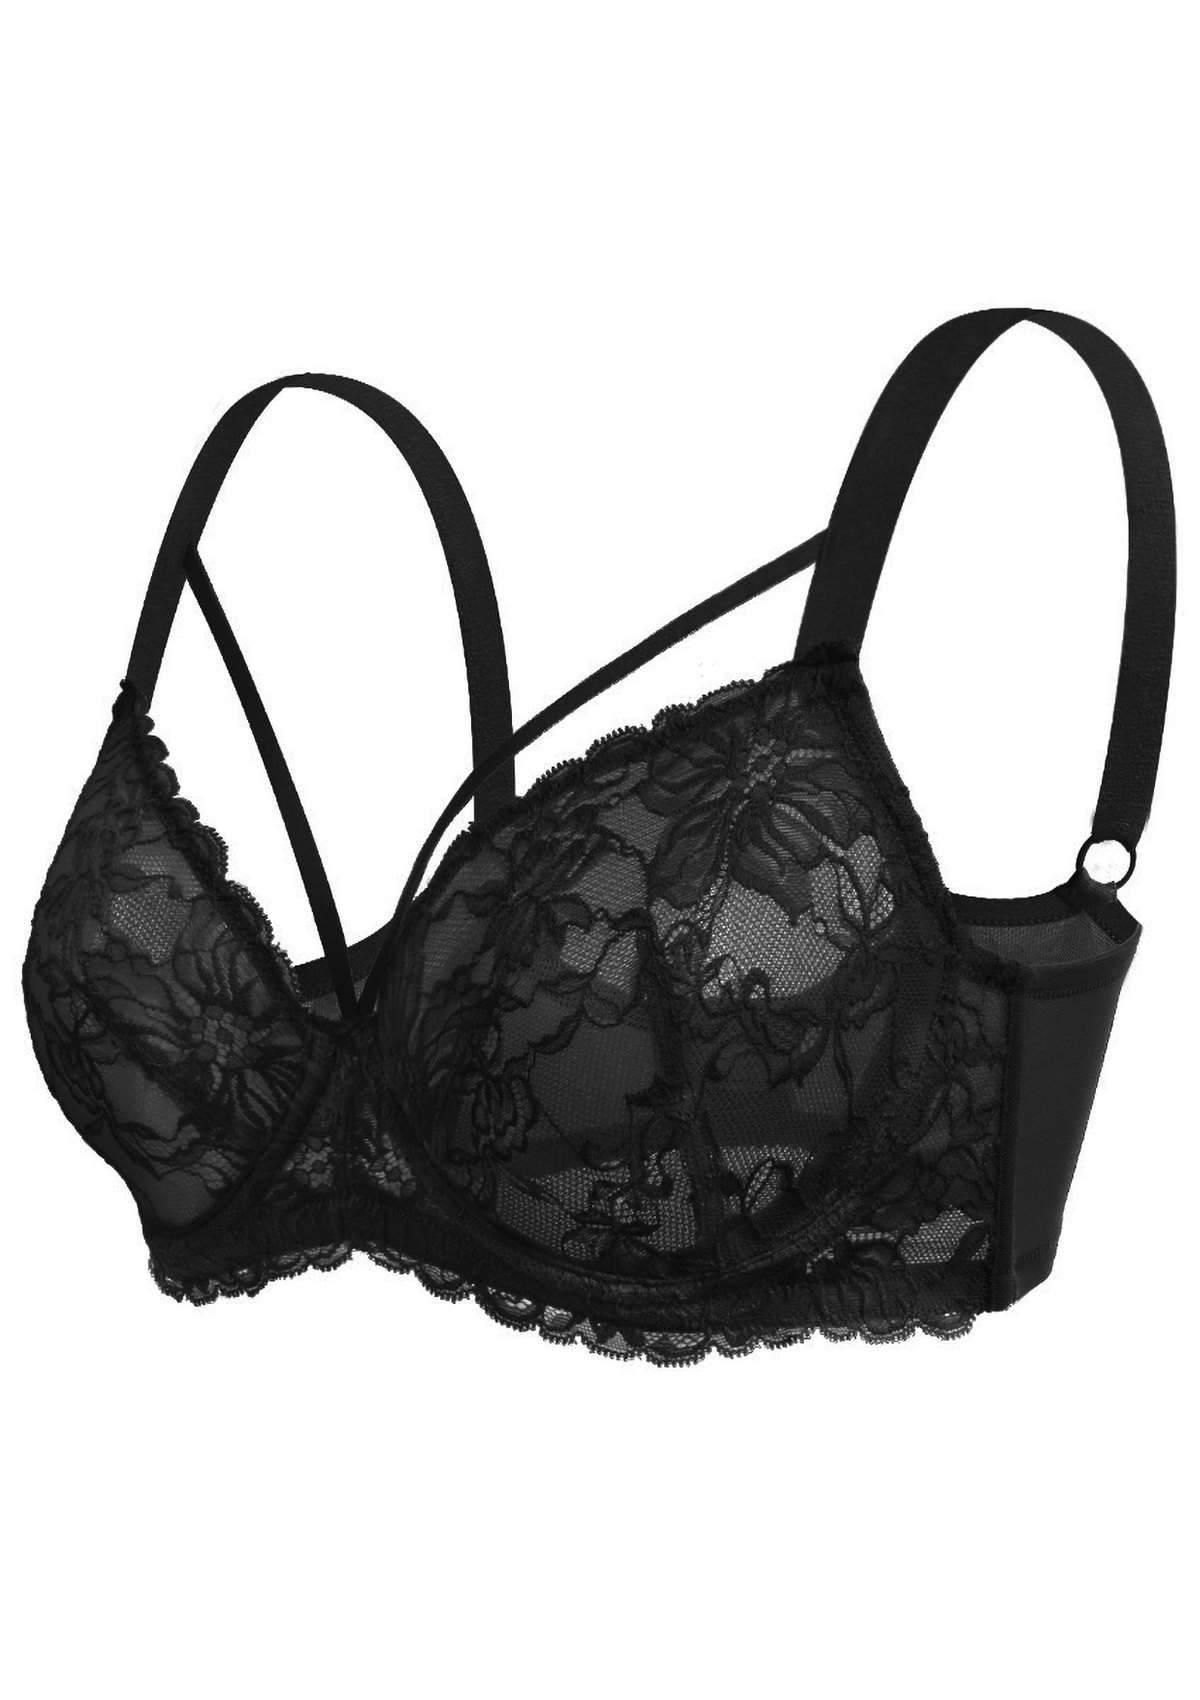 HSIA Pretty In Petals Bra - Plus Size Lingerie For Comfrot And Support - Black / 34 / DDD/F